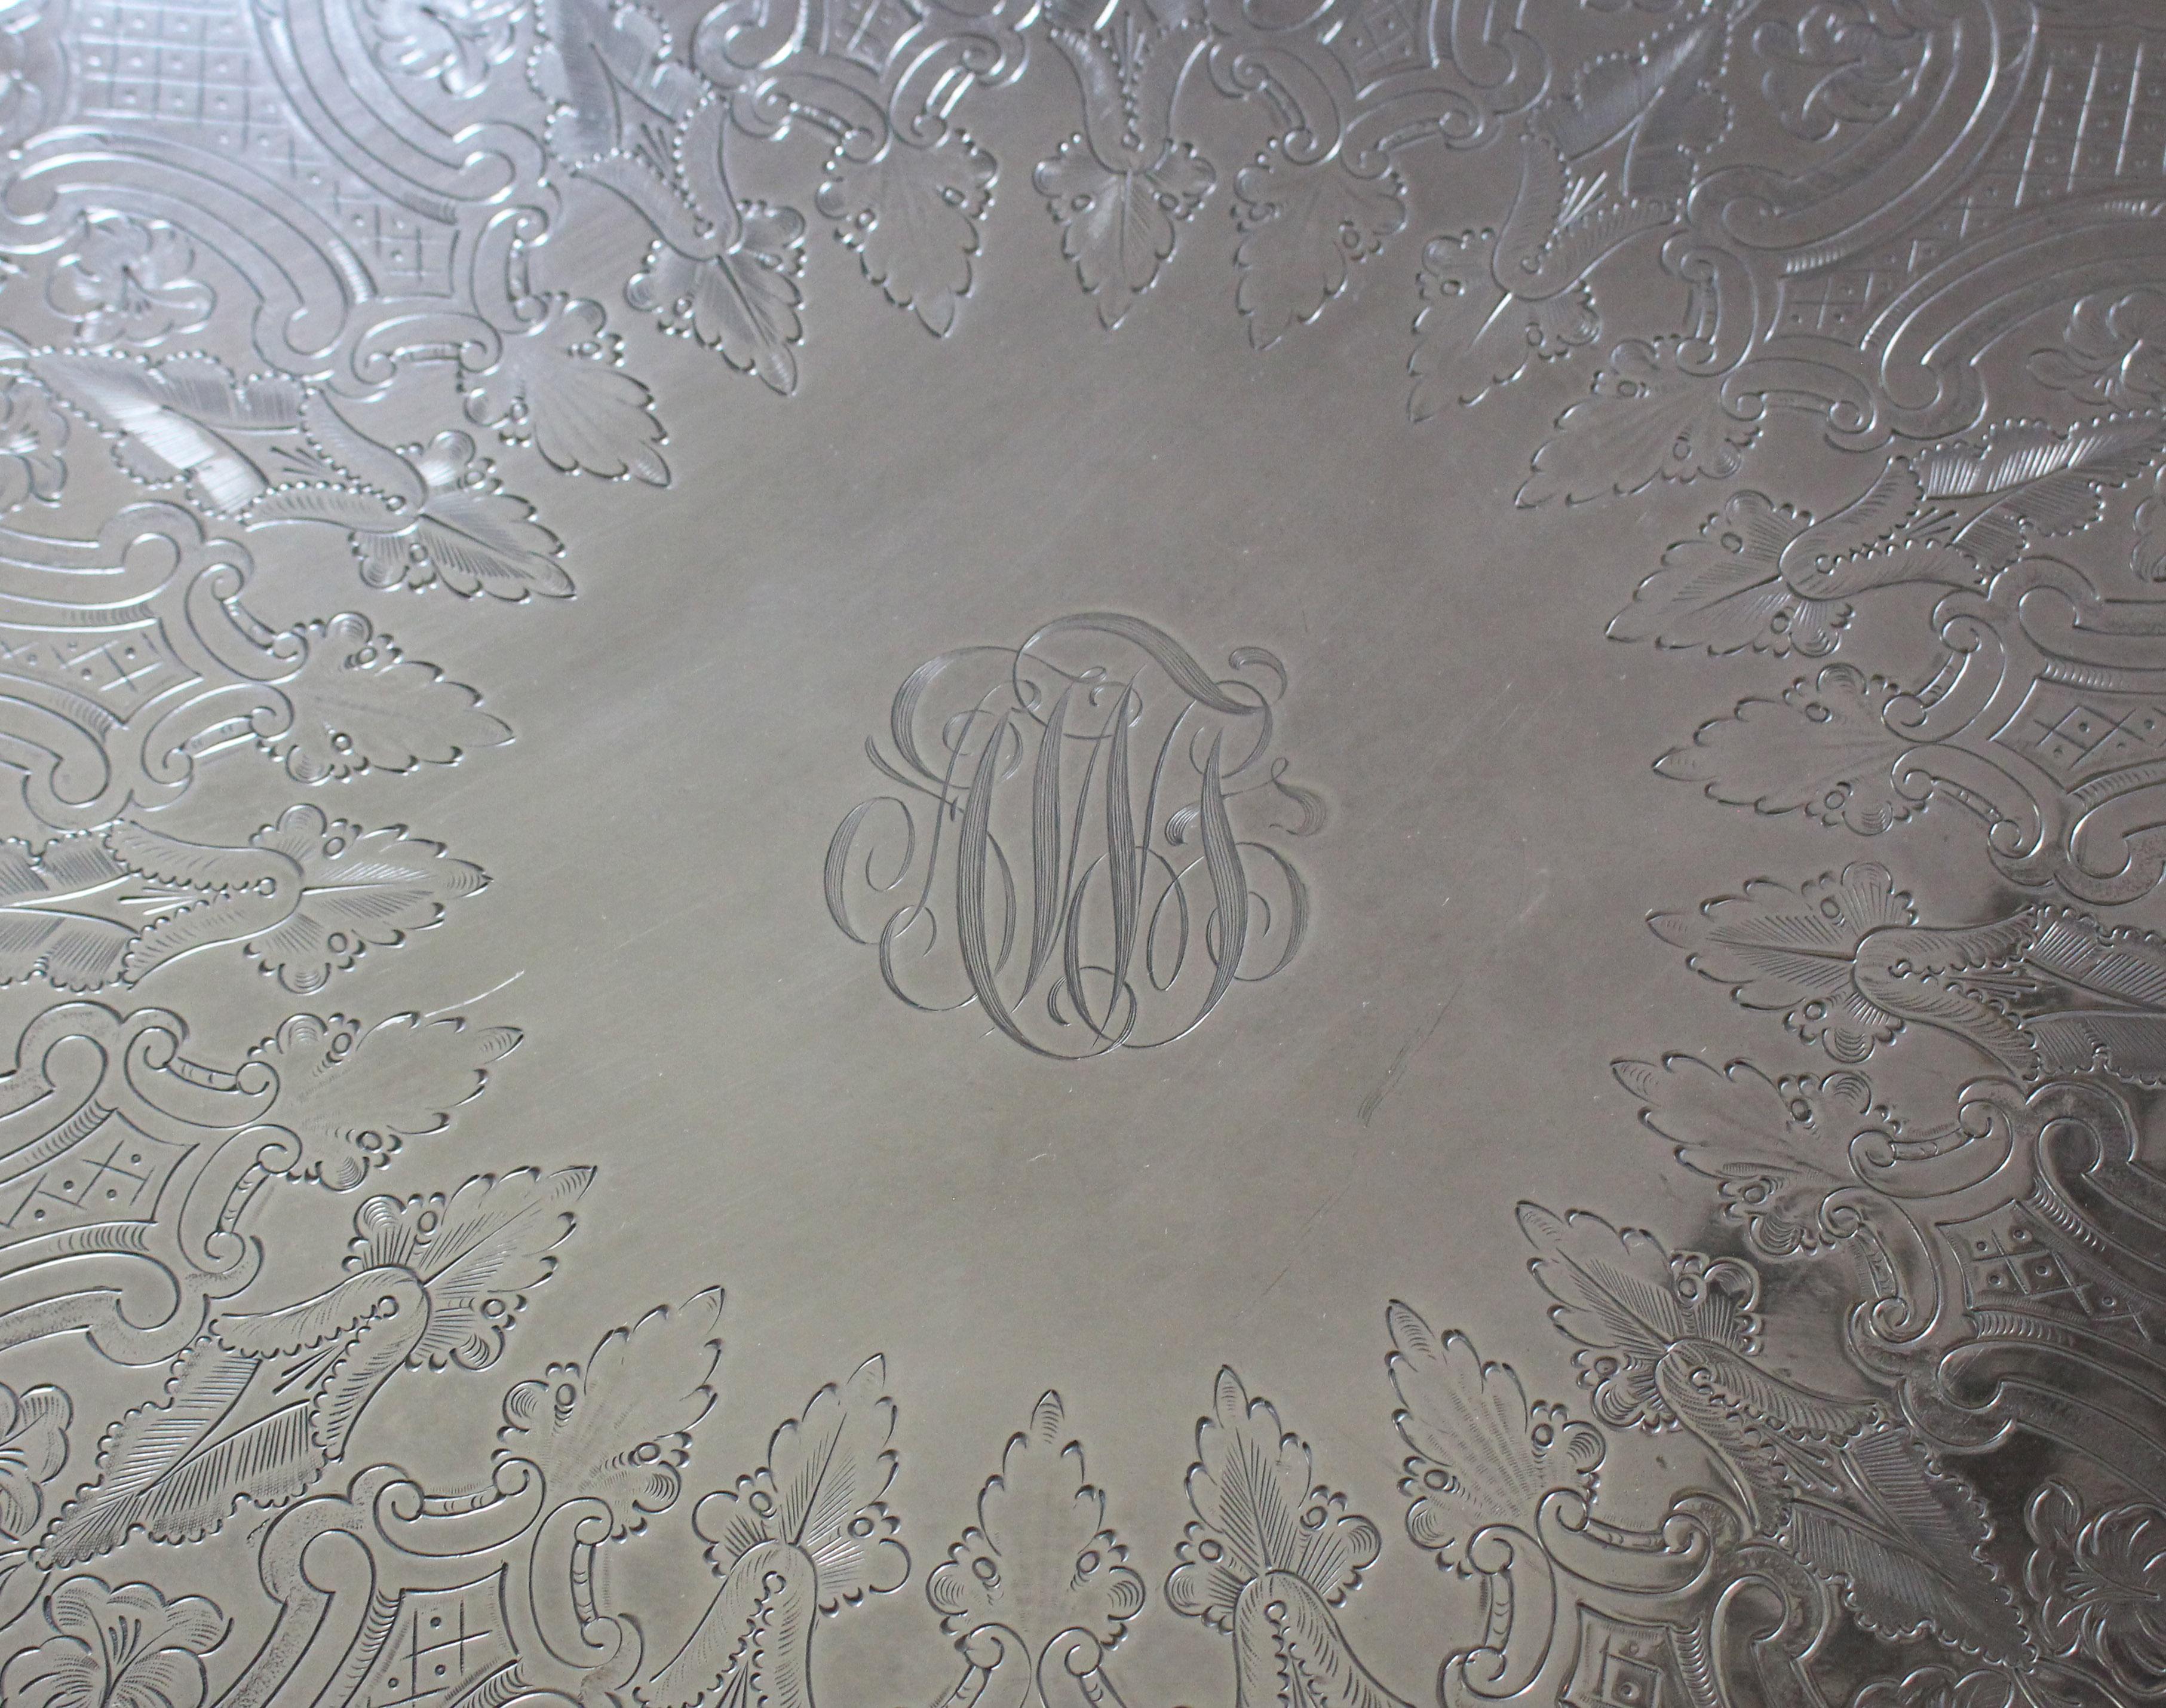 Electroplated salver, circa 1920, made in London by S.B. & Co. Electroplated nickle silver marks. Marked Made in England. Fine condition - the border design repeated in the vine & grape feet. Period monogram.
22 1/2